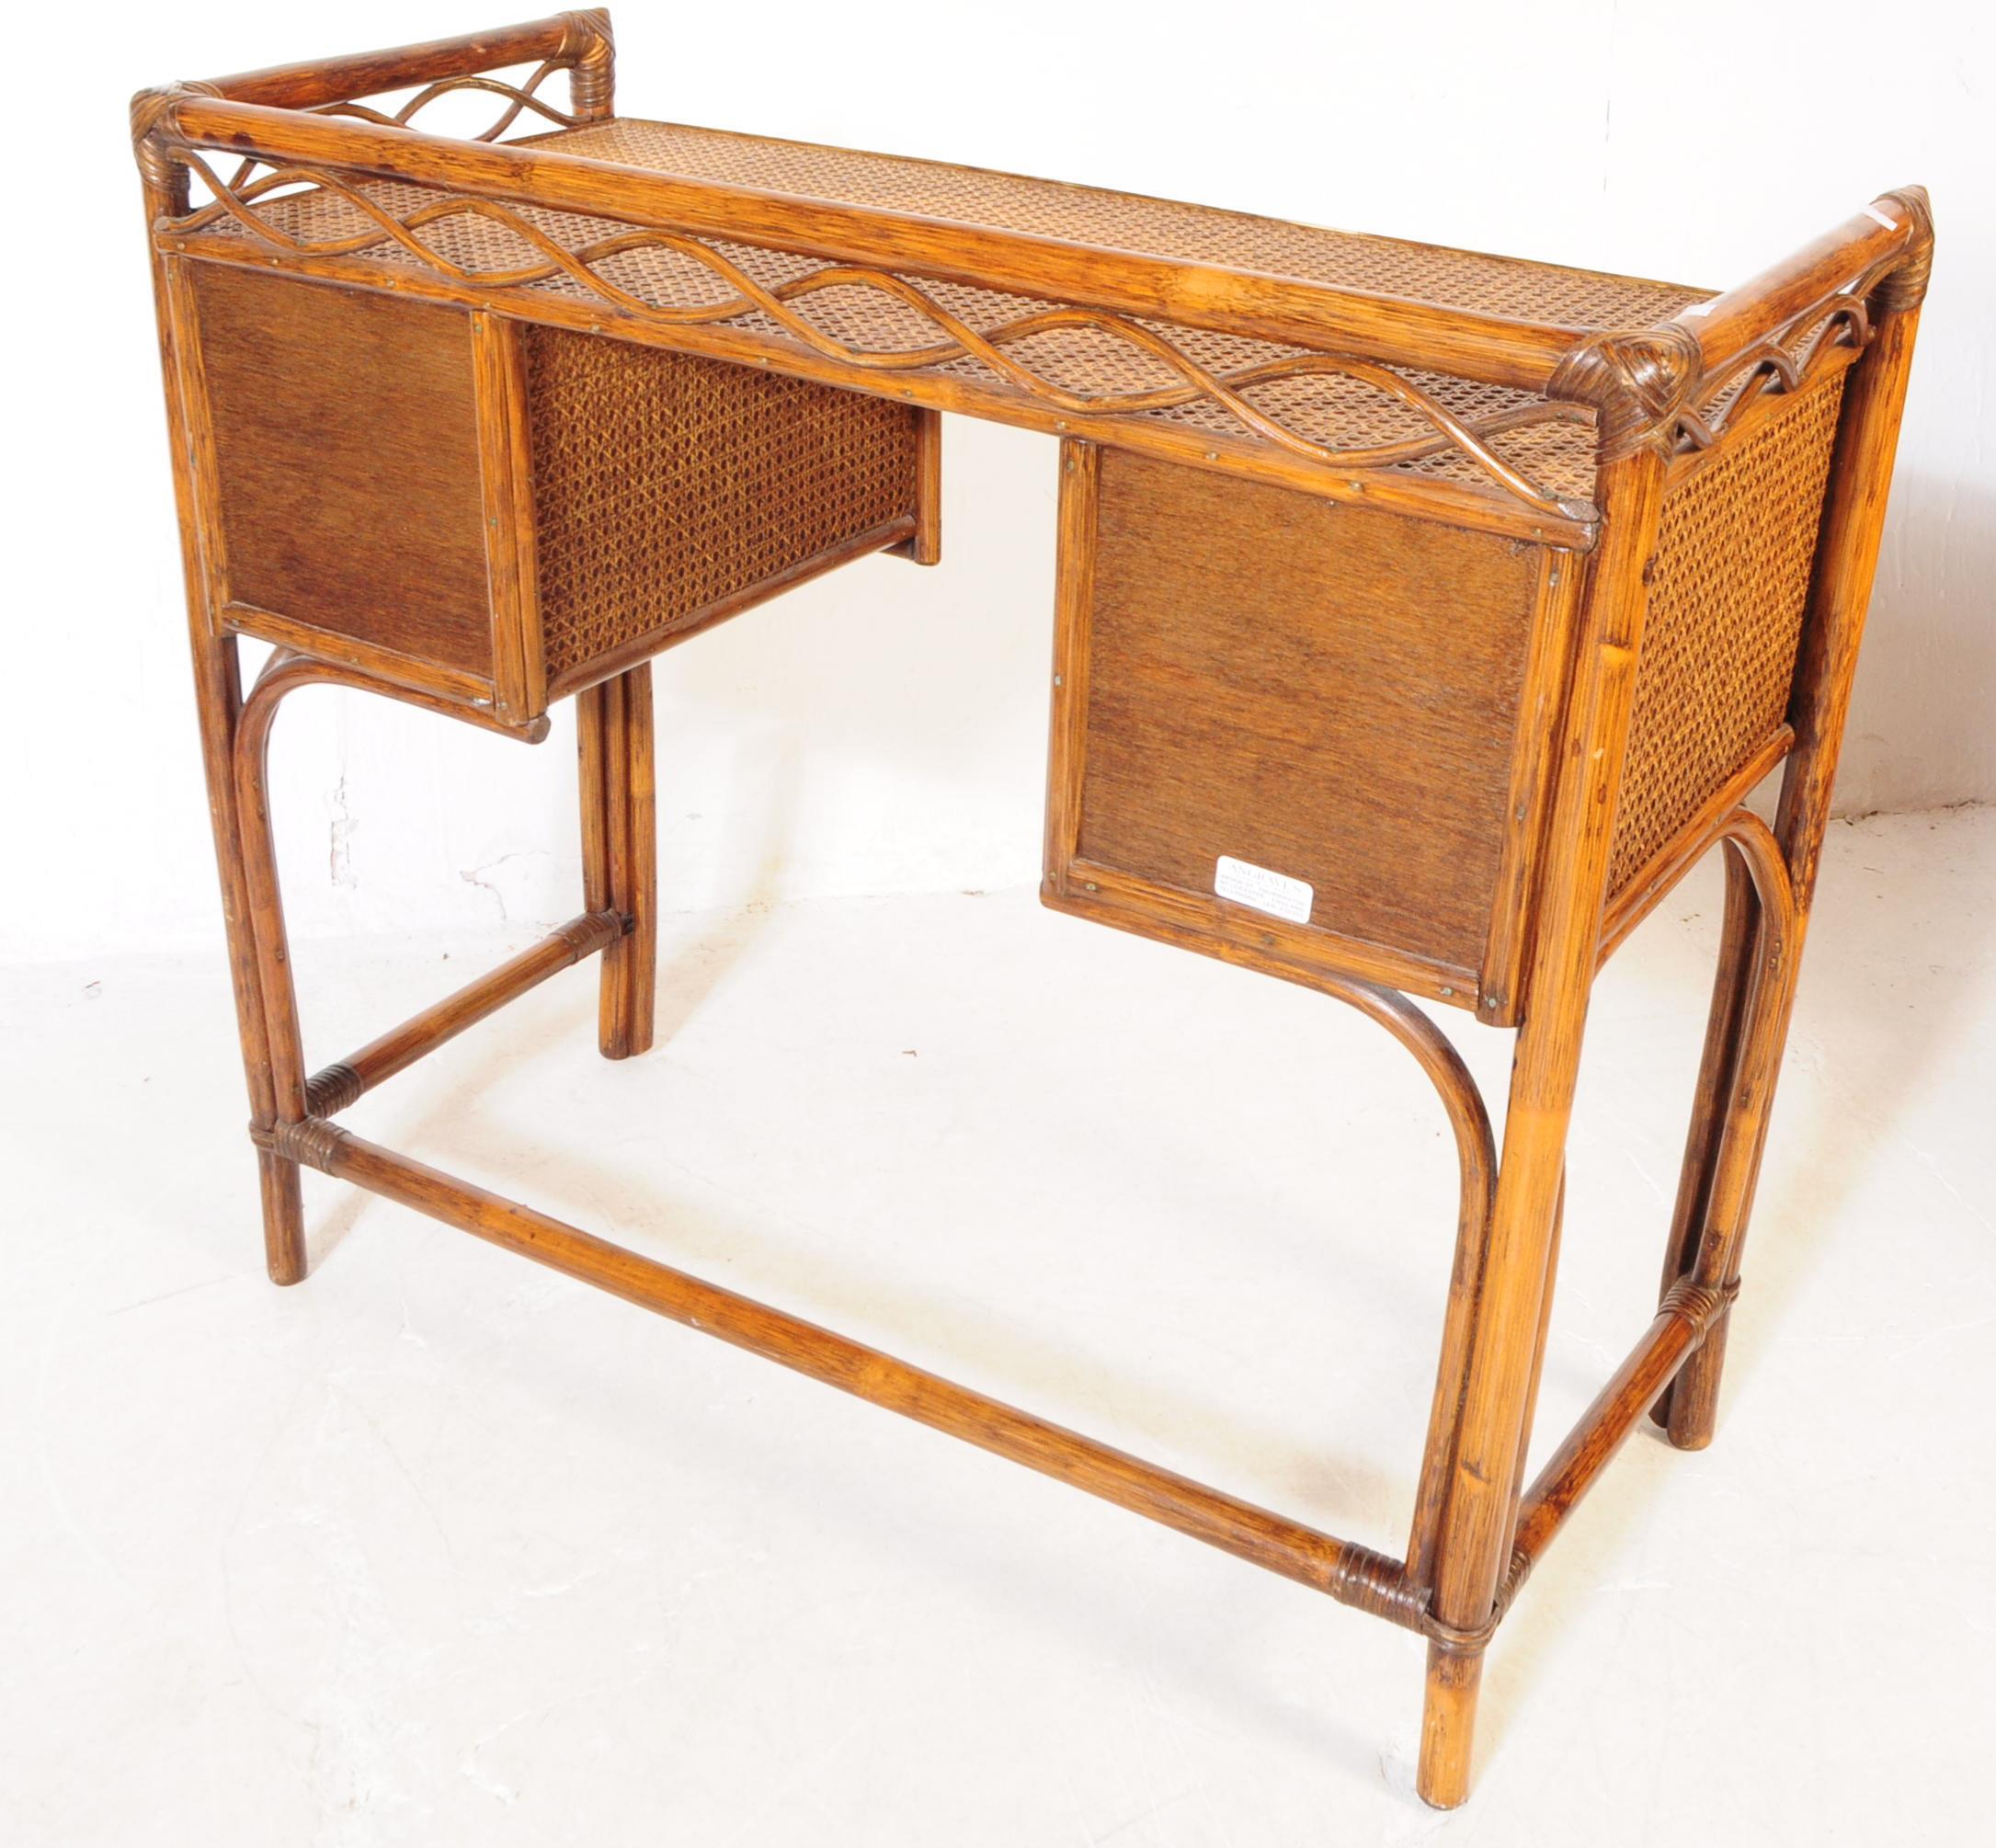 ANGRAVES OF LEICESTER - RETRO MID 20TH CENTURY RATTAN DESK - Image 5 of 6